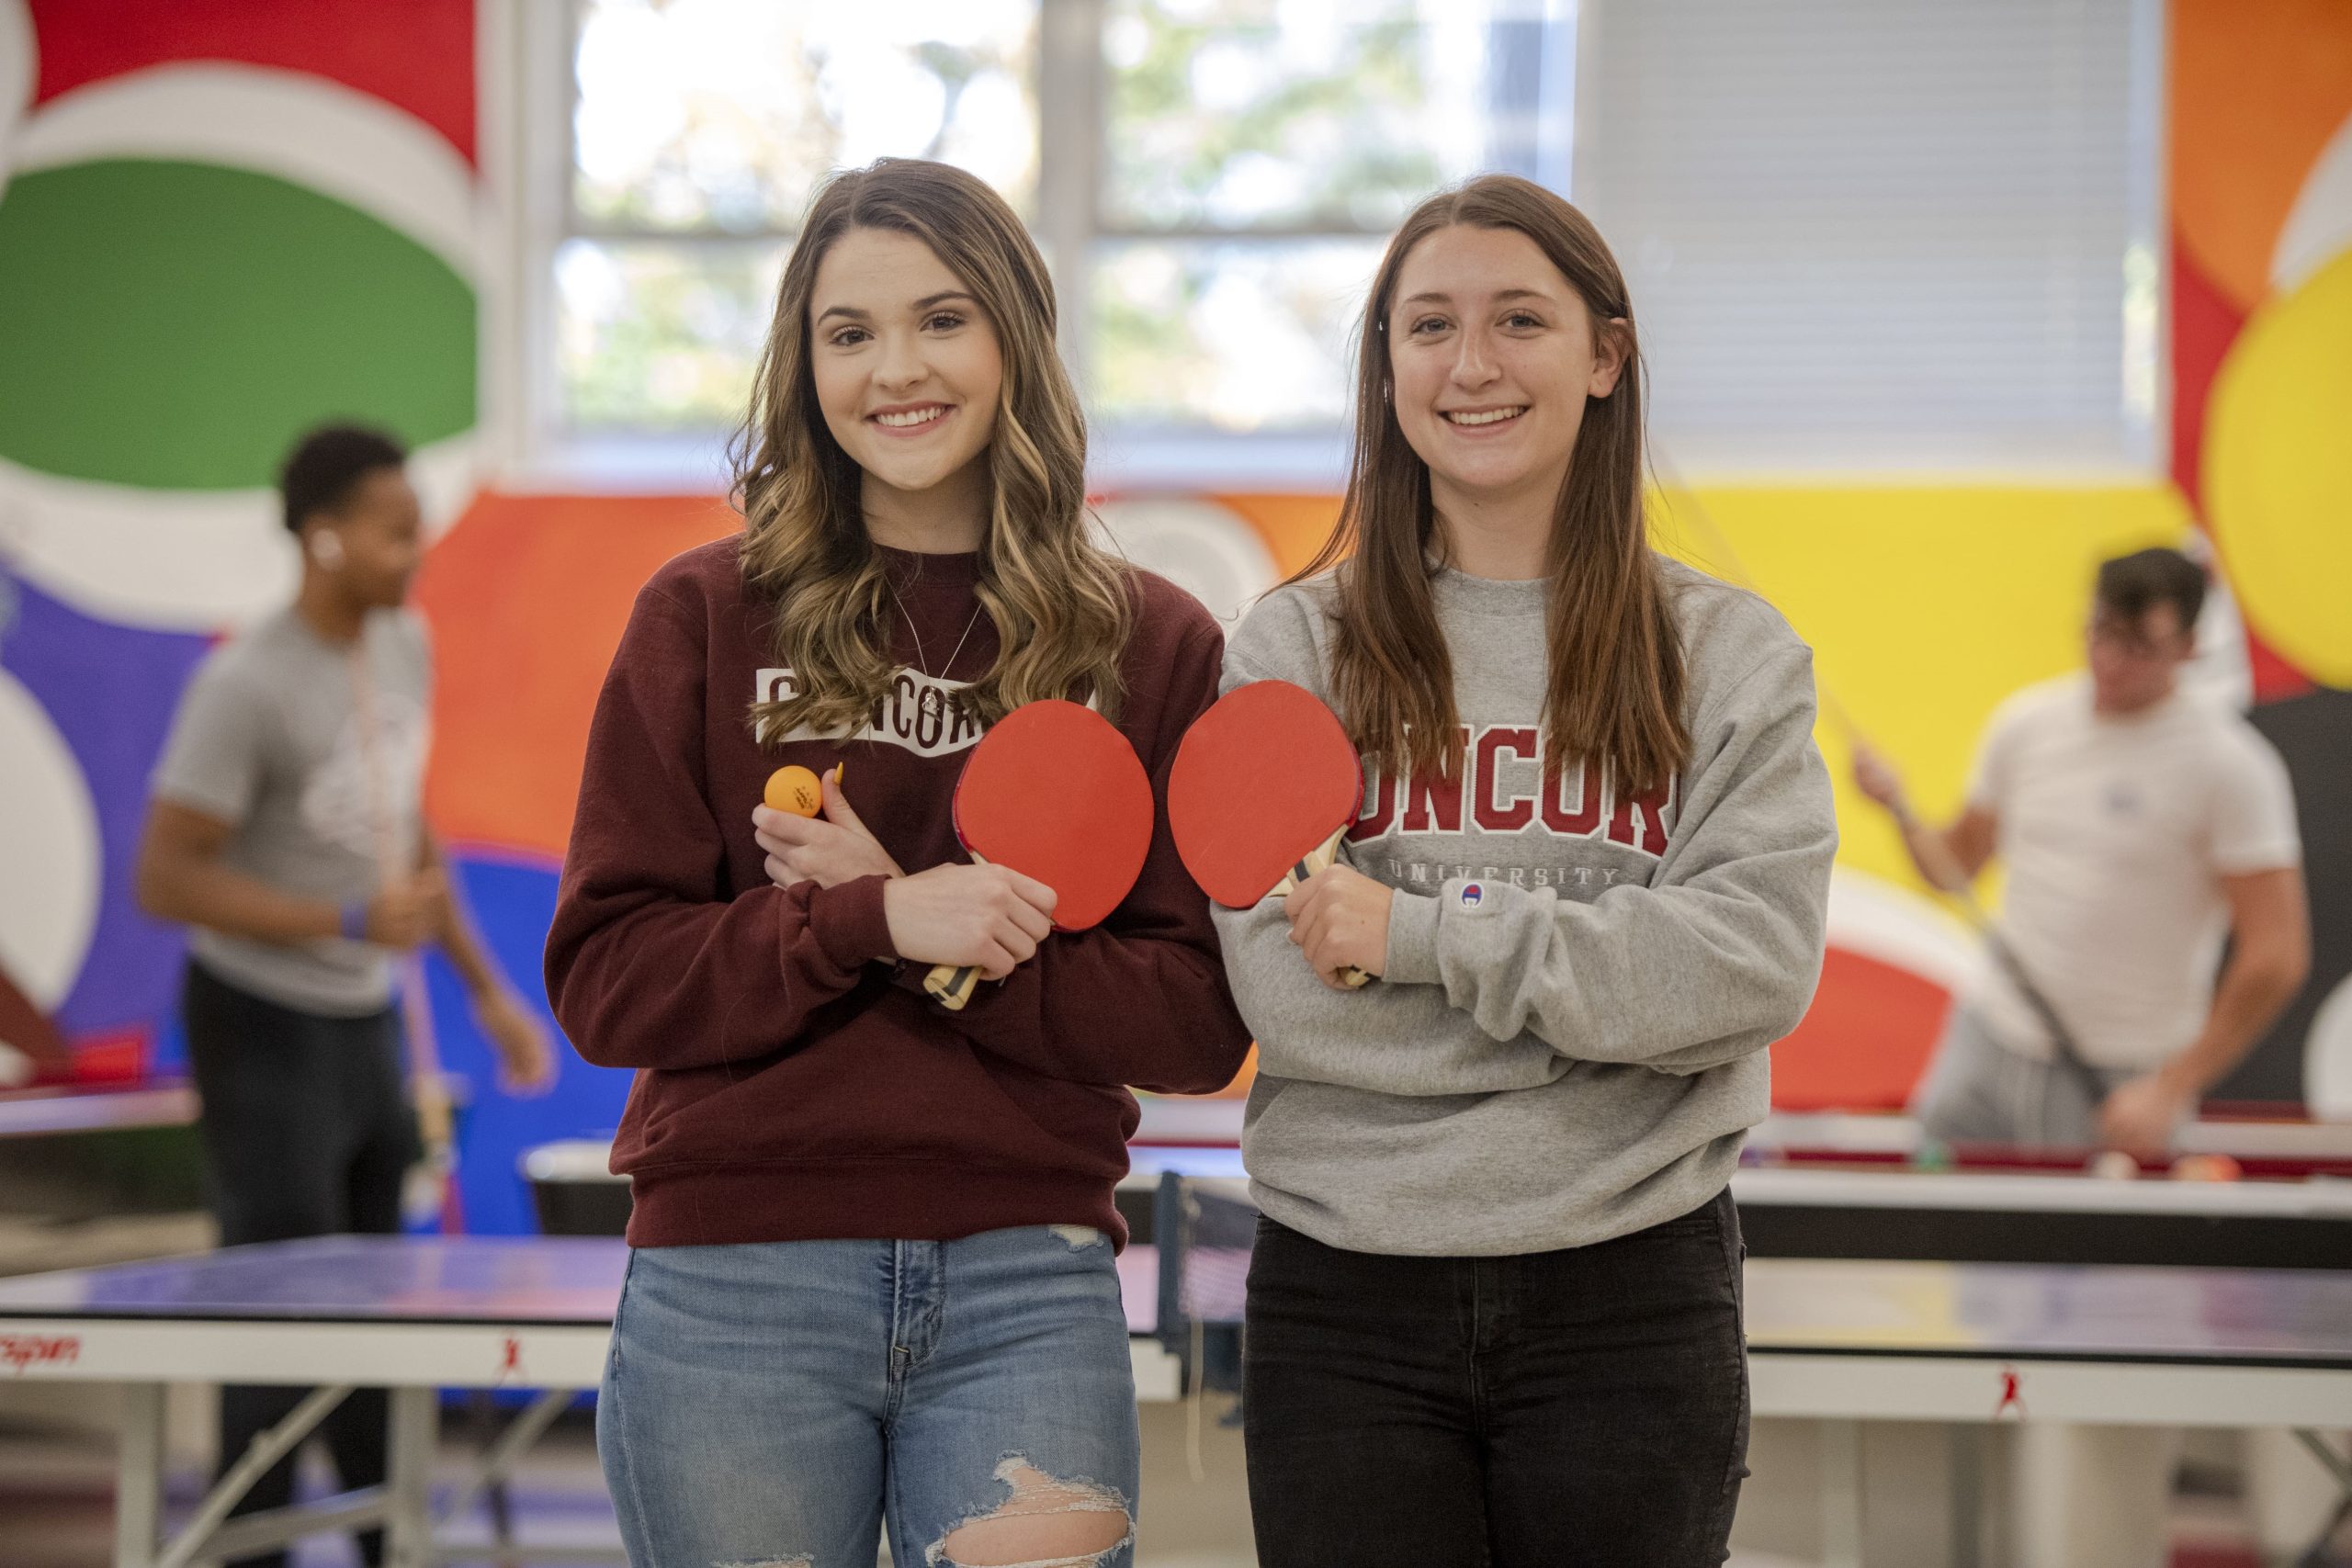 Two students holding table tennis paddles in Concord University's game room. There are two additional students playing pool in the background